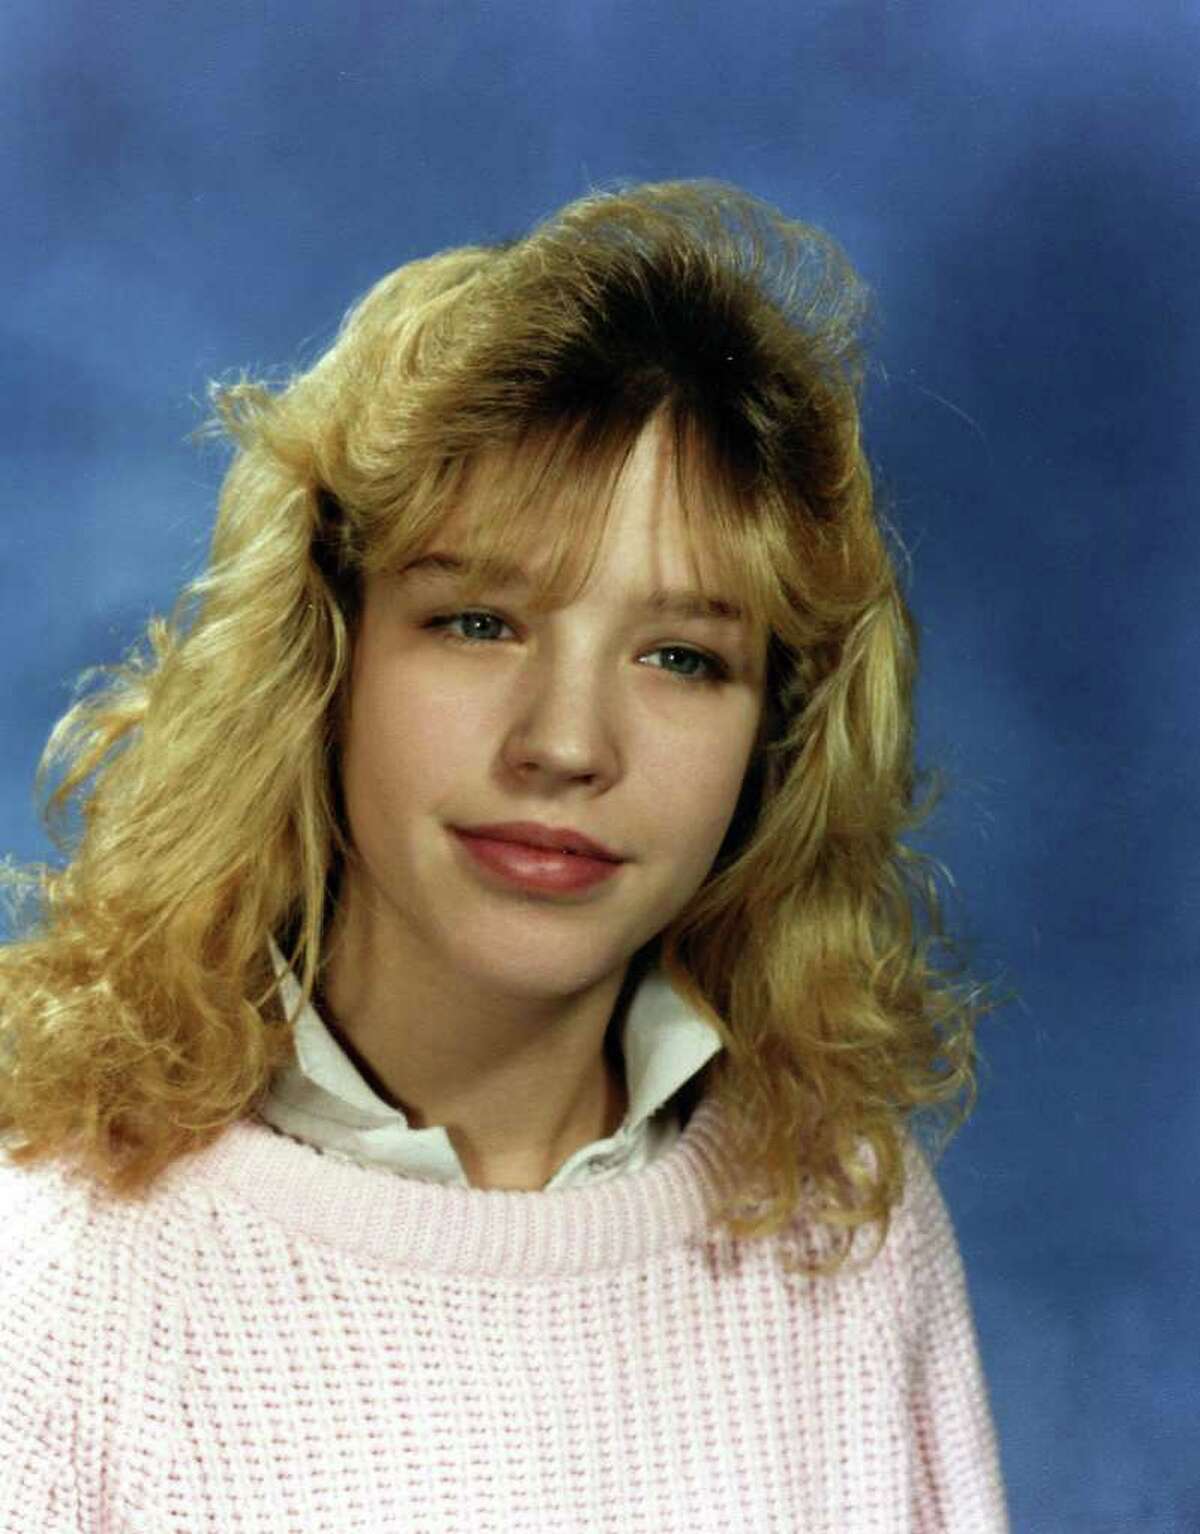 A woman, here in her 7th grade photograph, alleges that in 1990 she was drawn into a sexual relationship with Keith Raniere after he offered to tutor her in Latin and algebra.